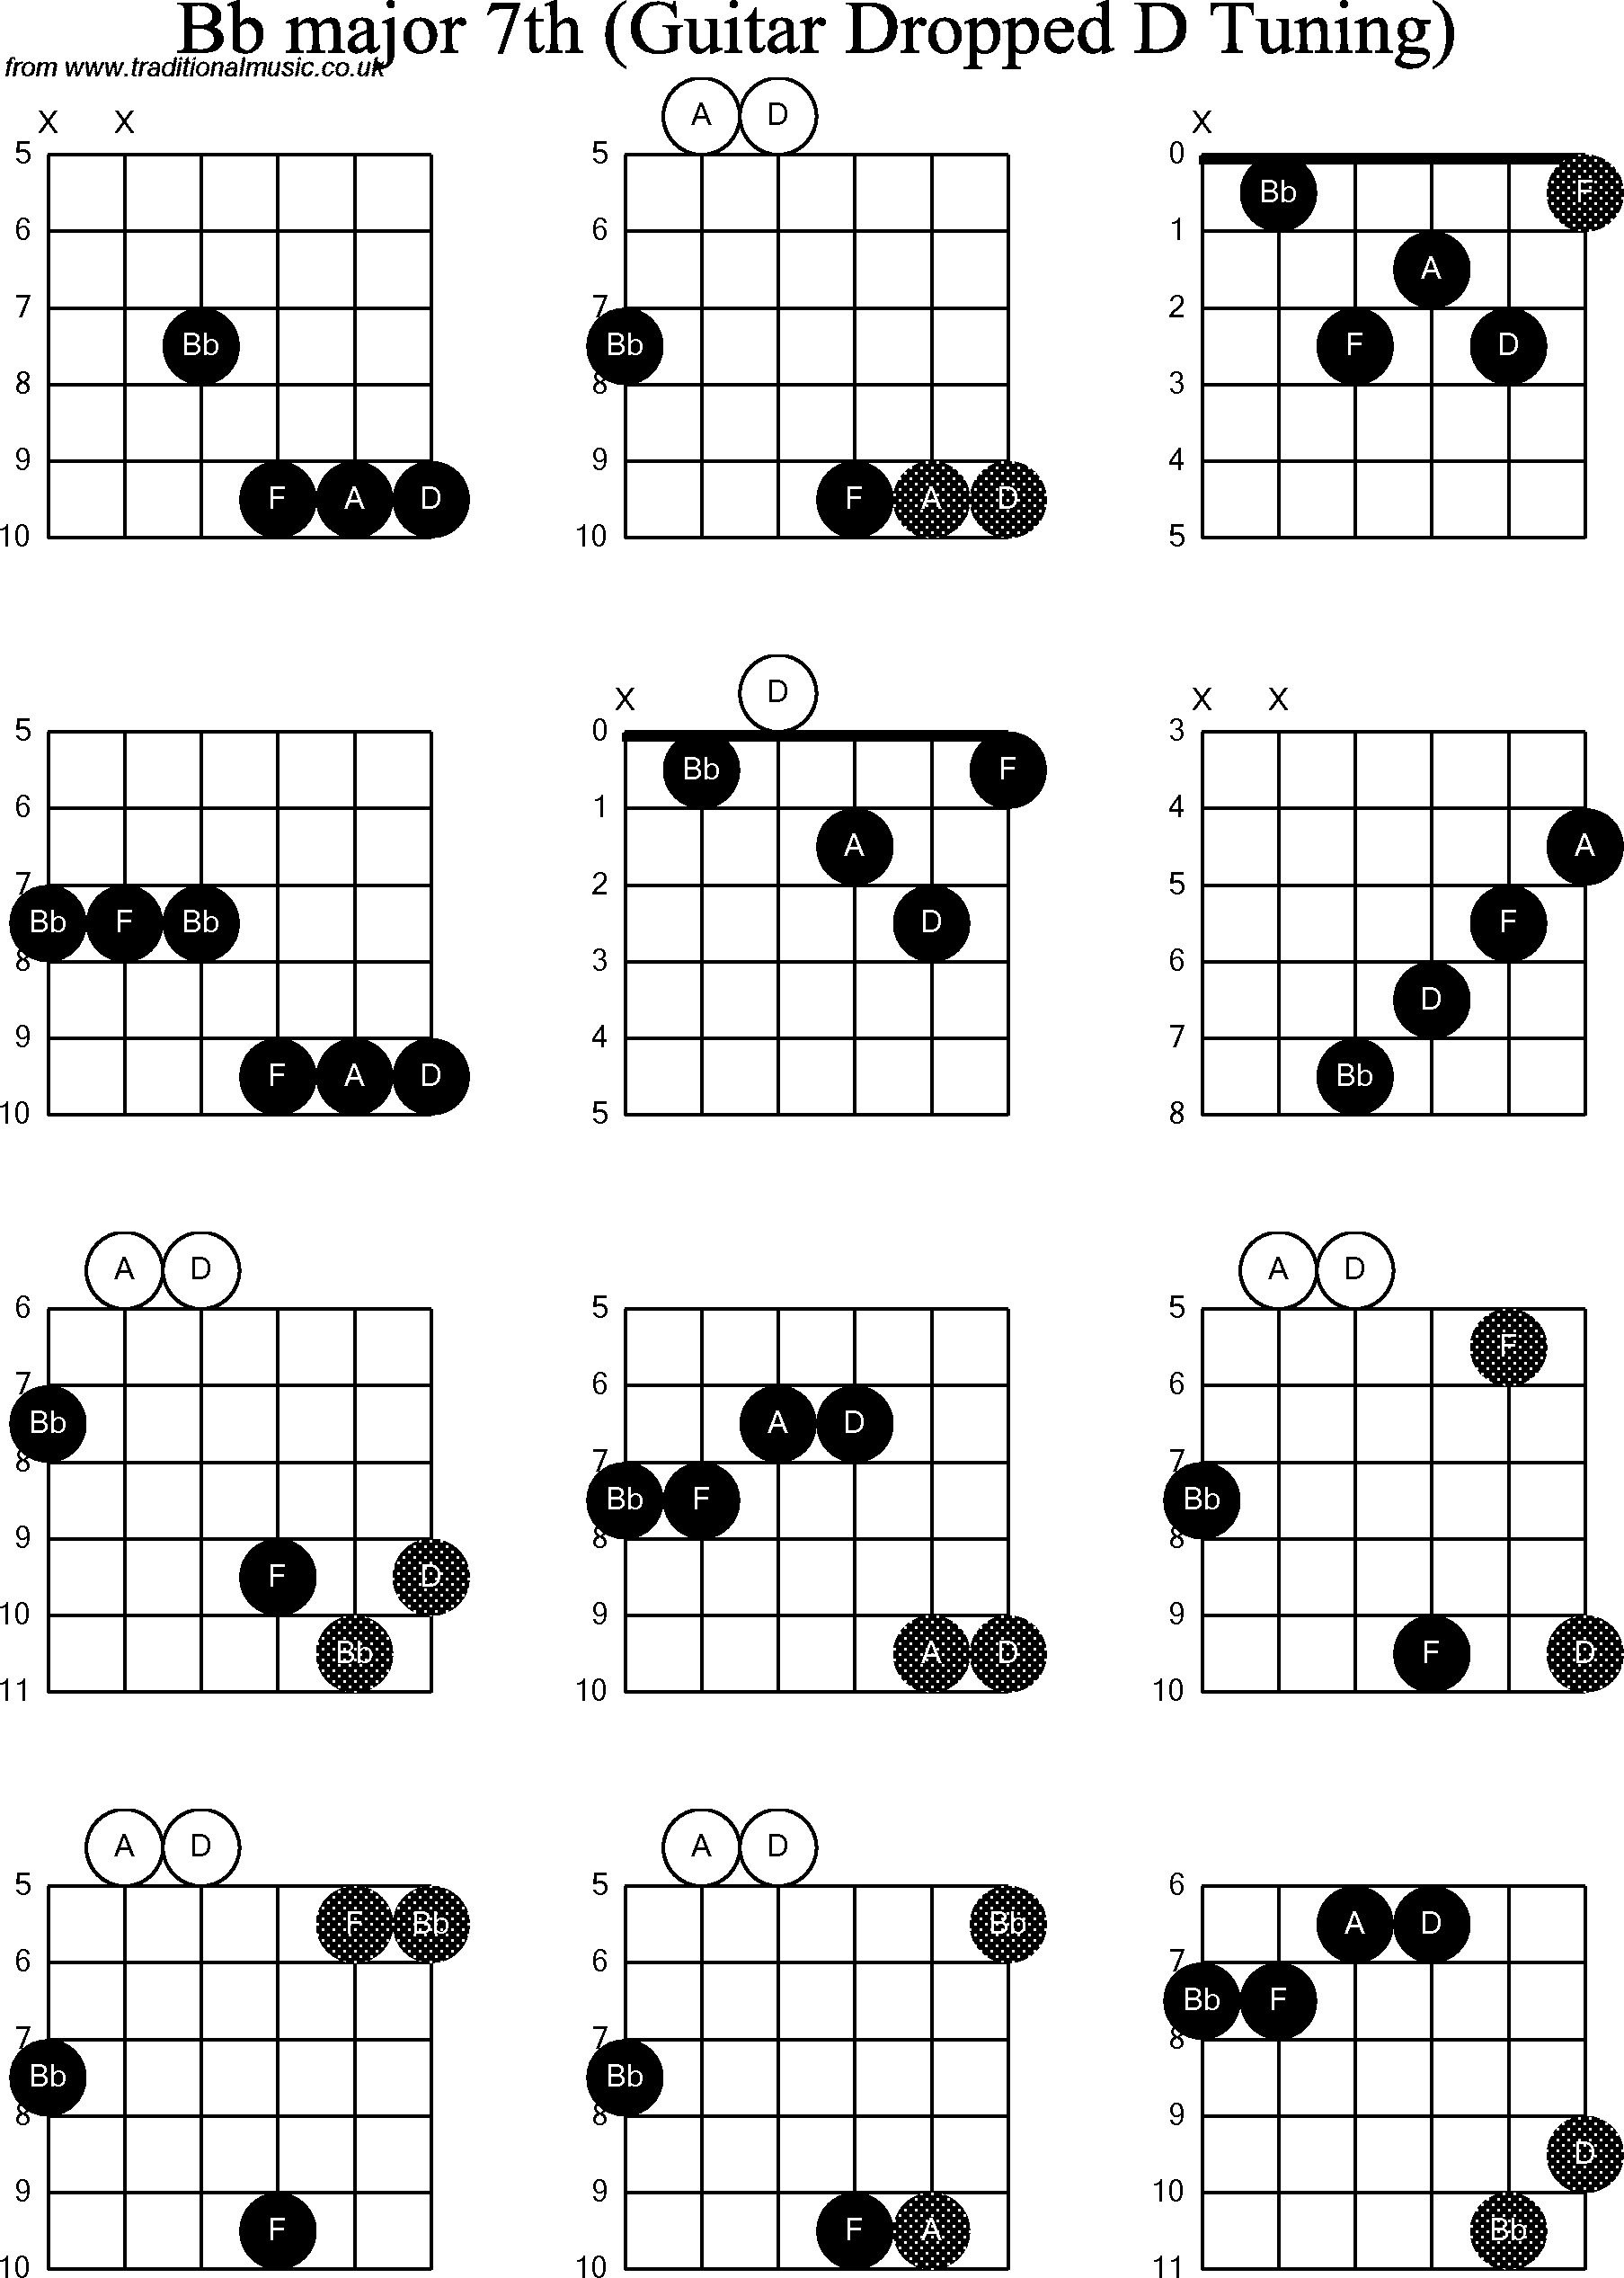 Chord diagrams for dropped D Guitar(DADGBE), Bb Major7th